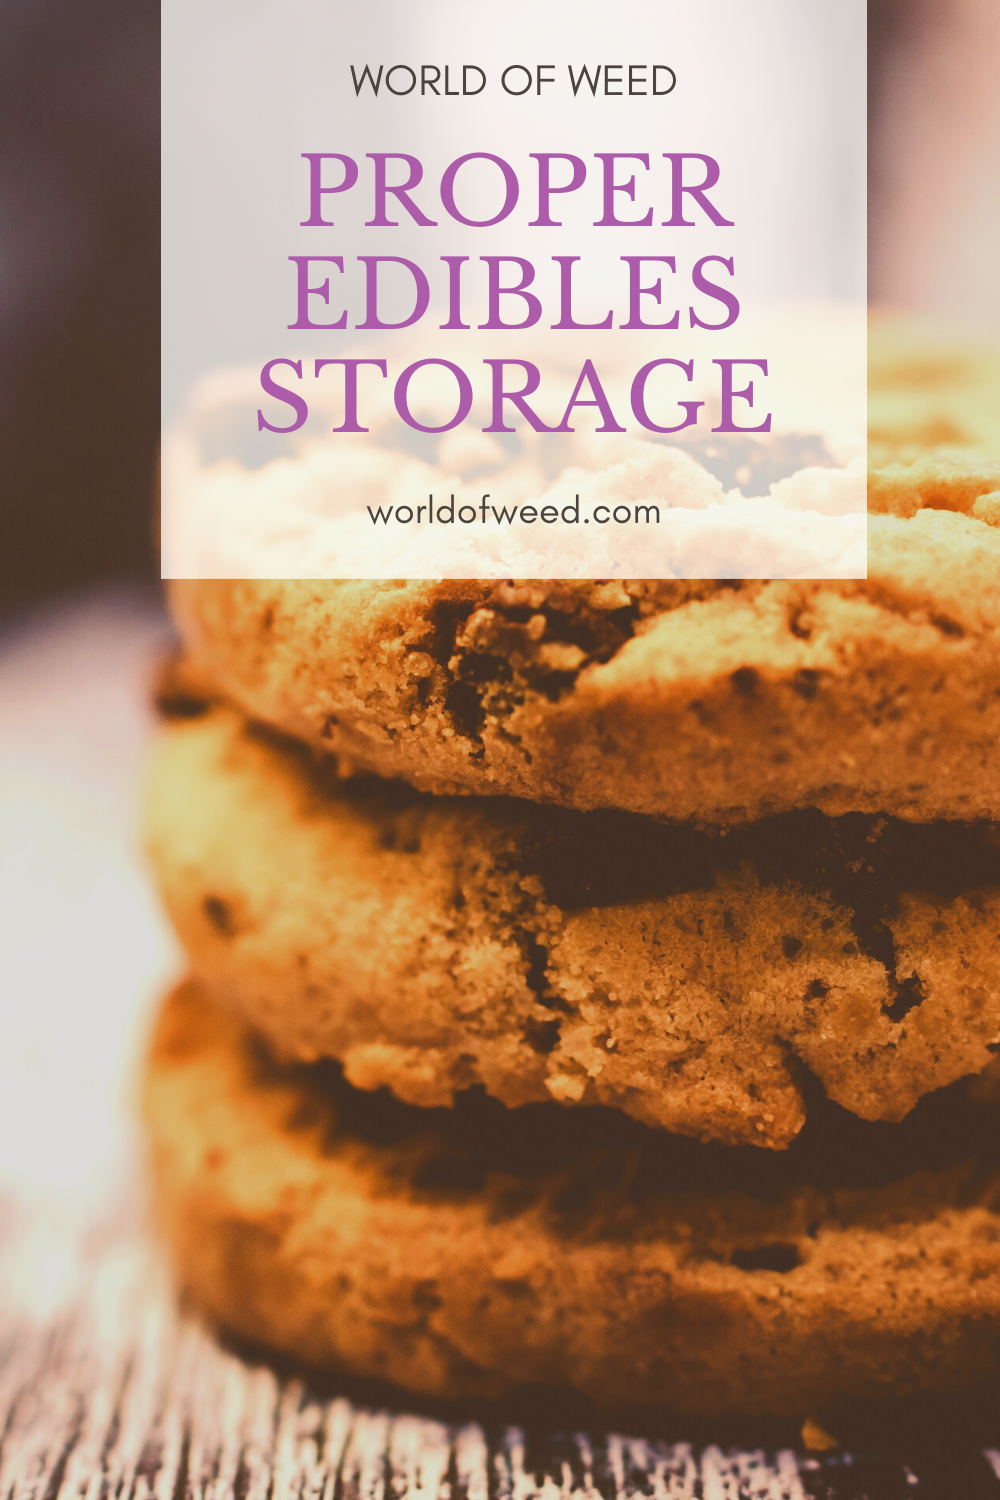 Your Guide to Proper Edibles Storage